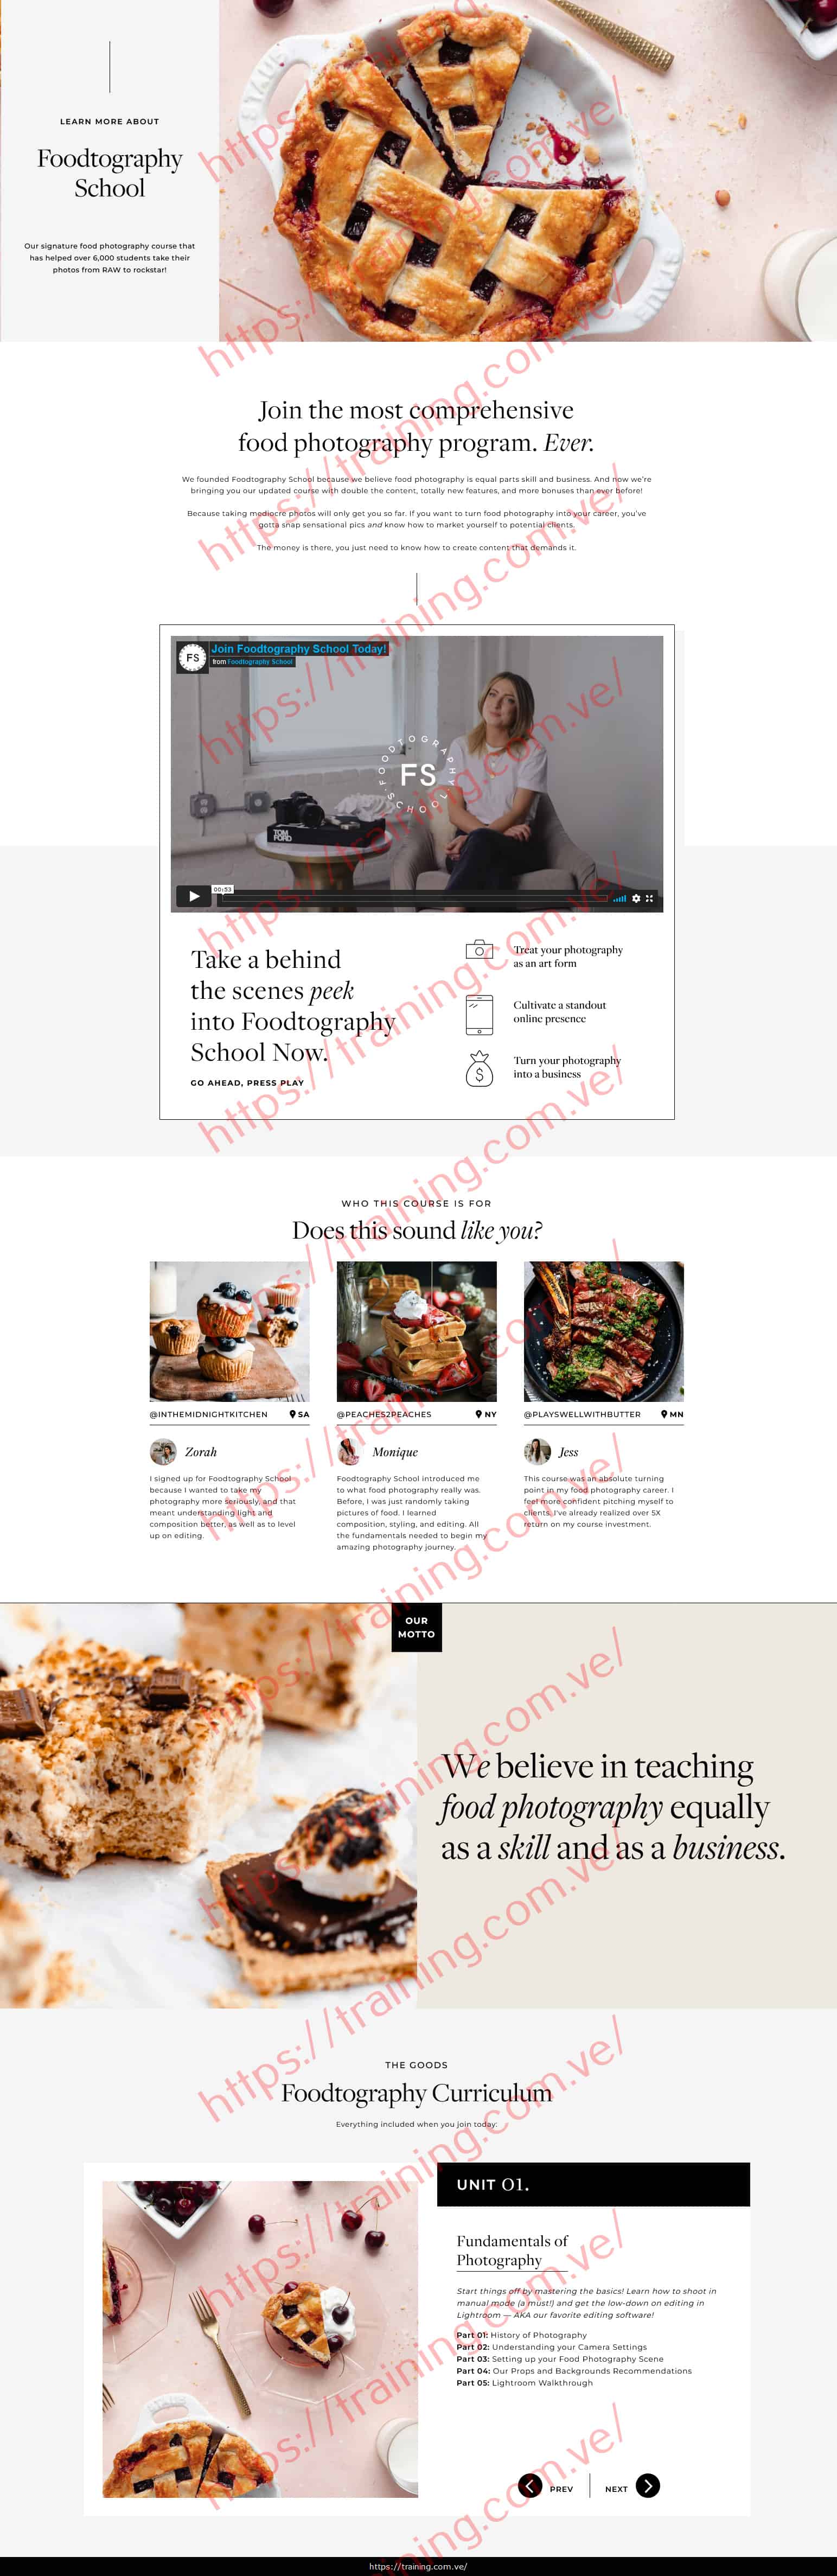 Foodtography School 2022 by Sarah Crawford Sales Page